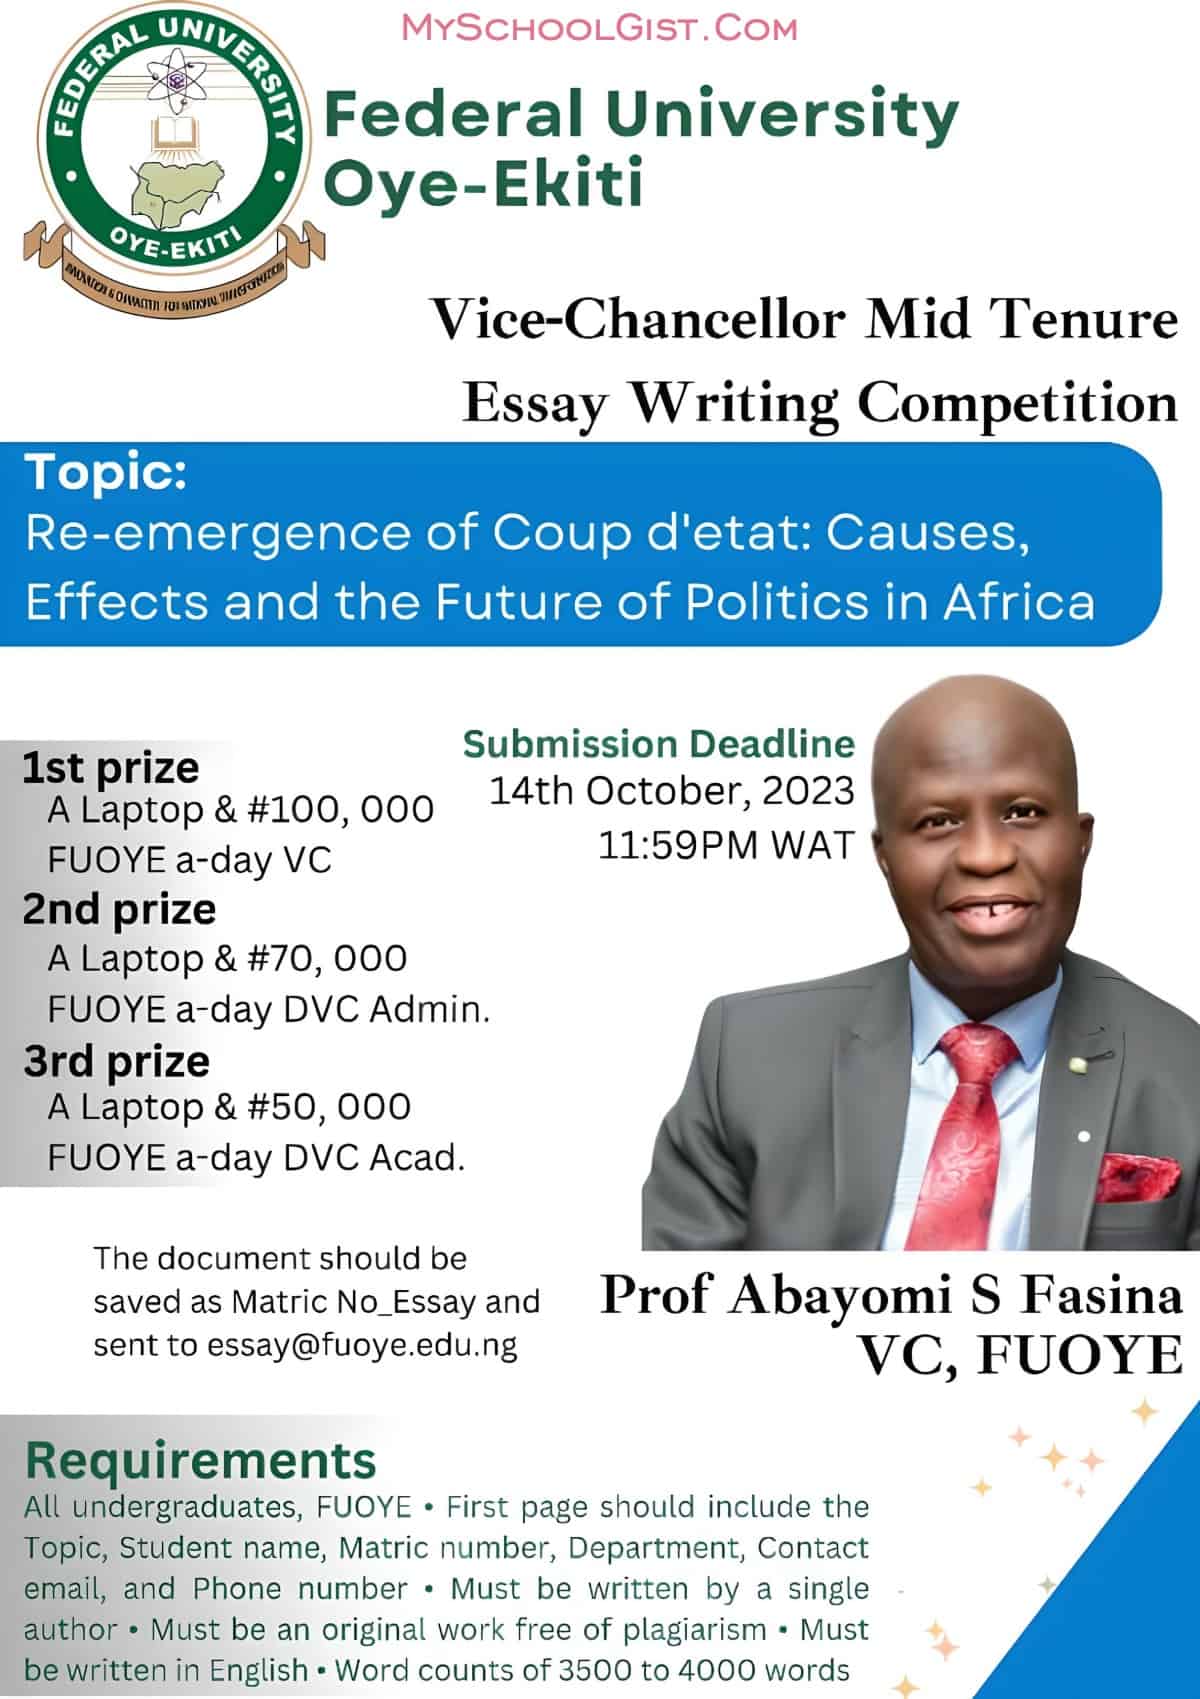 FUOYE Vice Chancellor's Mid-Tenure Writing Competition